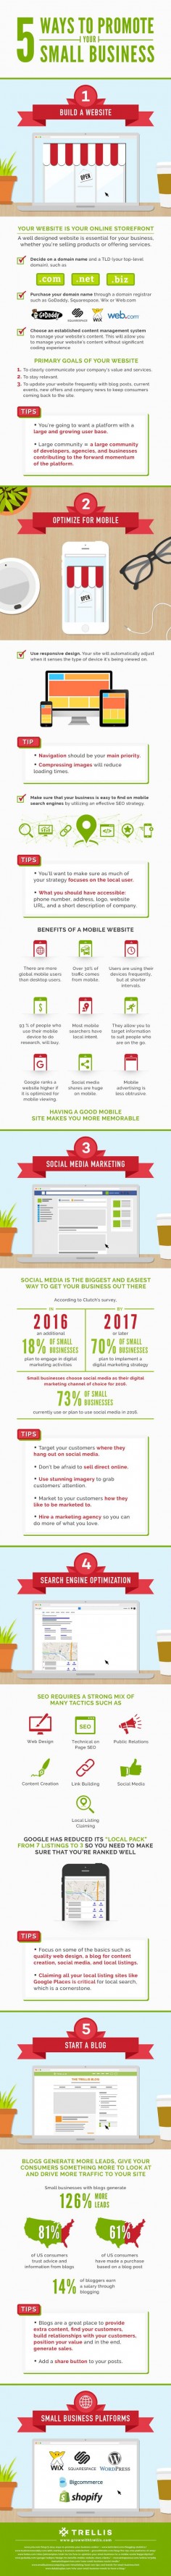 5 Ways to Promote Your Small Business Online [Infographic]